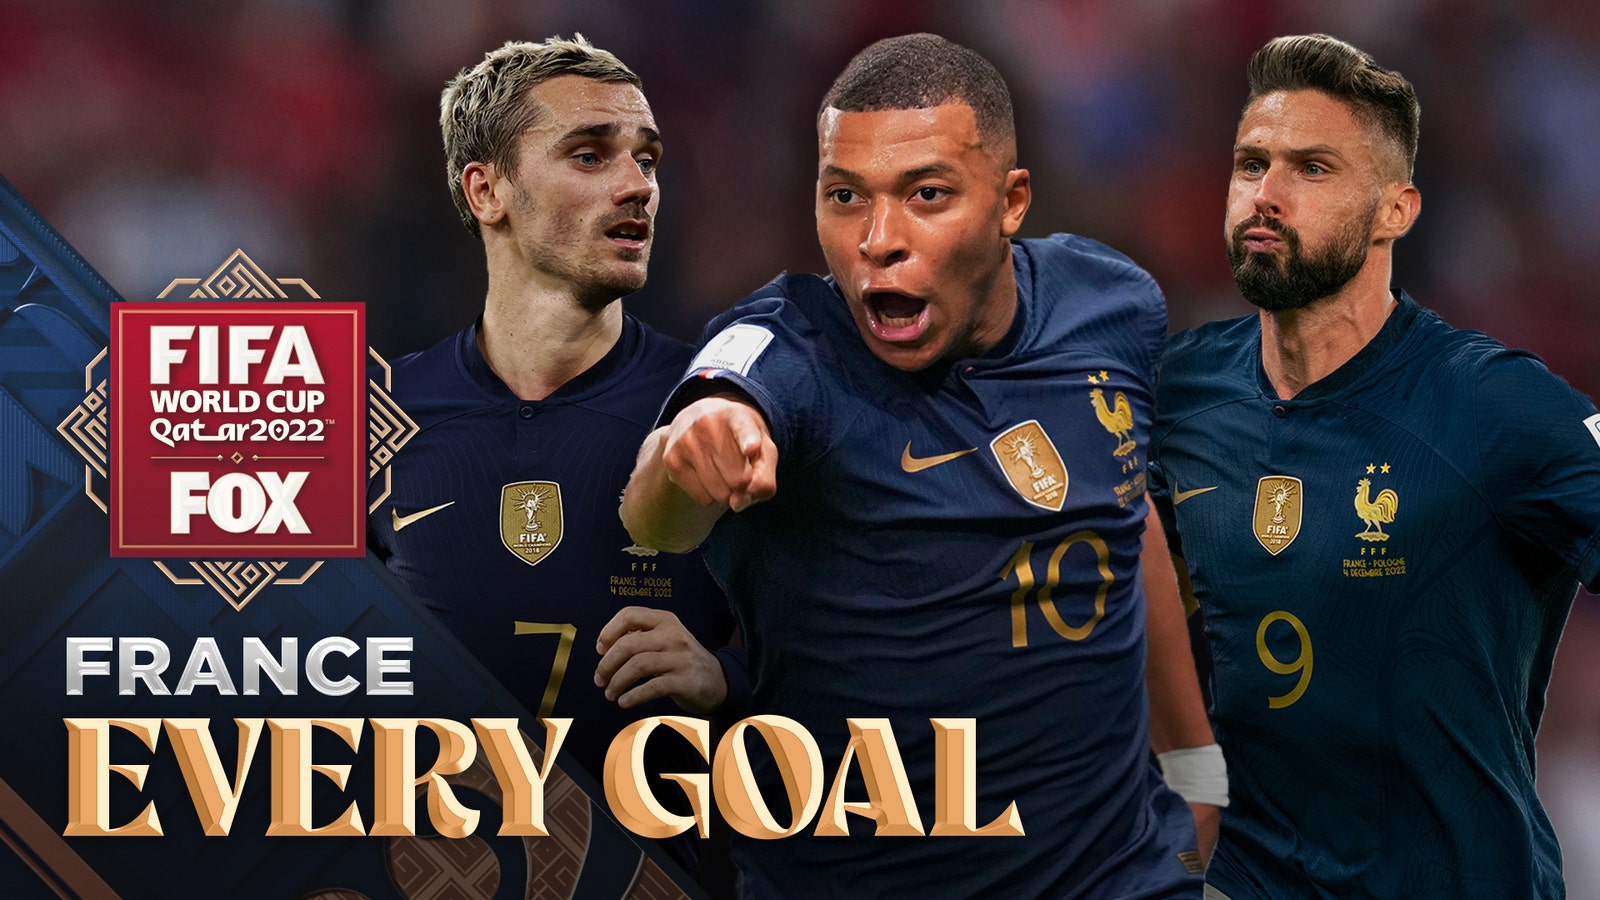 Kylian Mbappé, Olivier Giroud, Antoine Griezmann and every goal for France in the 2022 FIFA World Cup